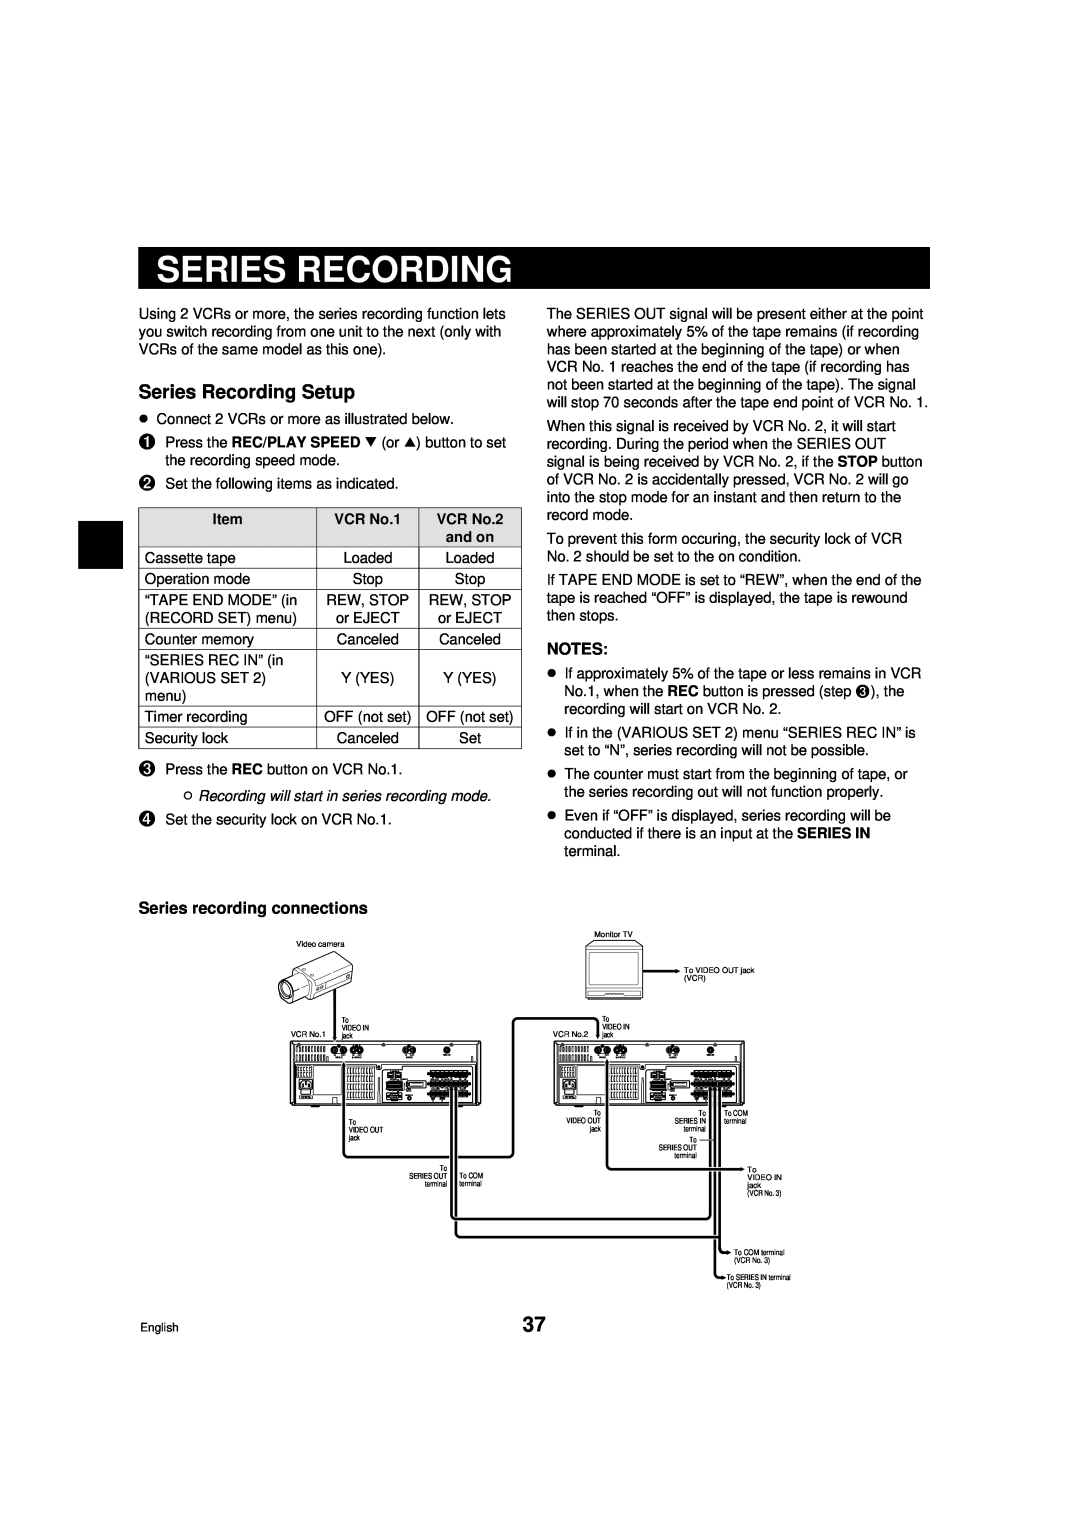 Sanyo DTL-4800 Series Recording Setup, Series recording connections, ø Recording will start in series recording mode 